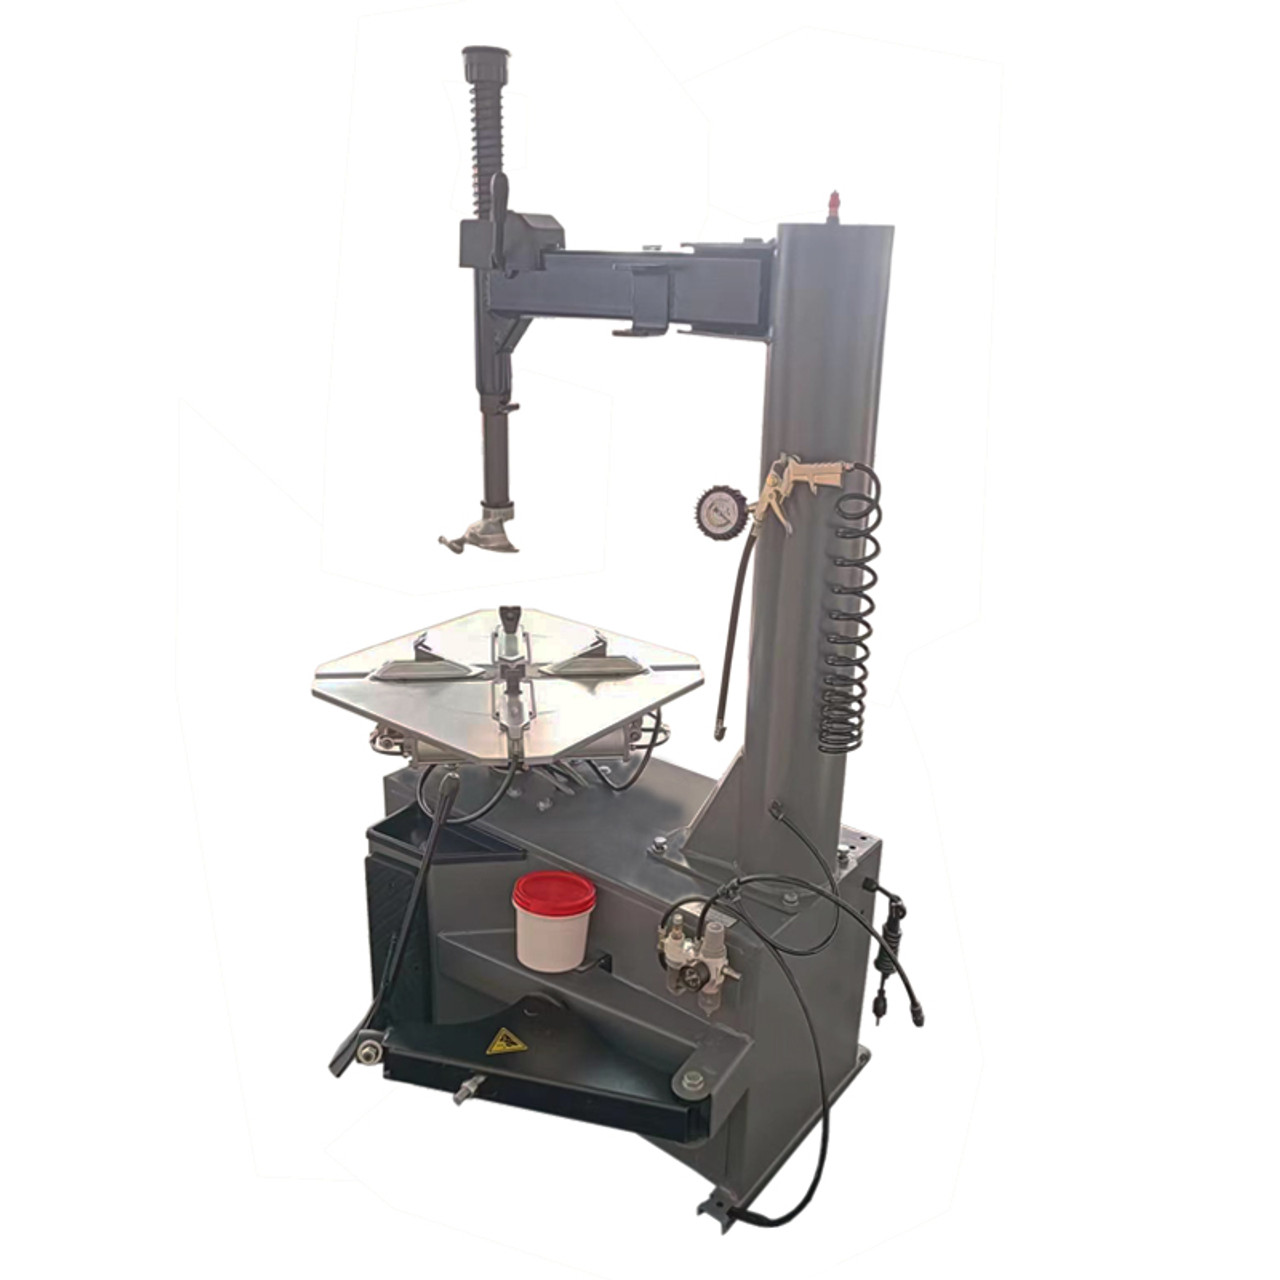 CAE-2625TC LH Tire Changer with Bead Blaster, Electric/Pneumatic Wheel Clamp (110V/60HZ/1PH) with Left Assist Arm